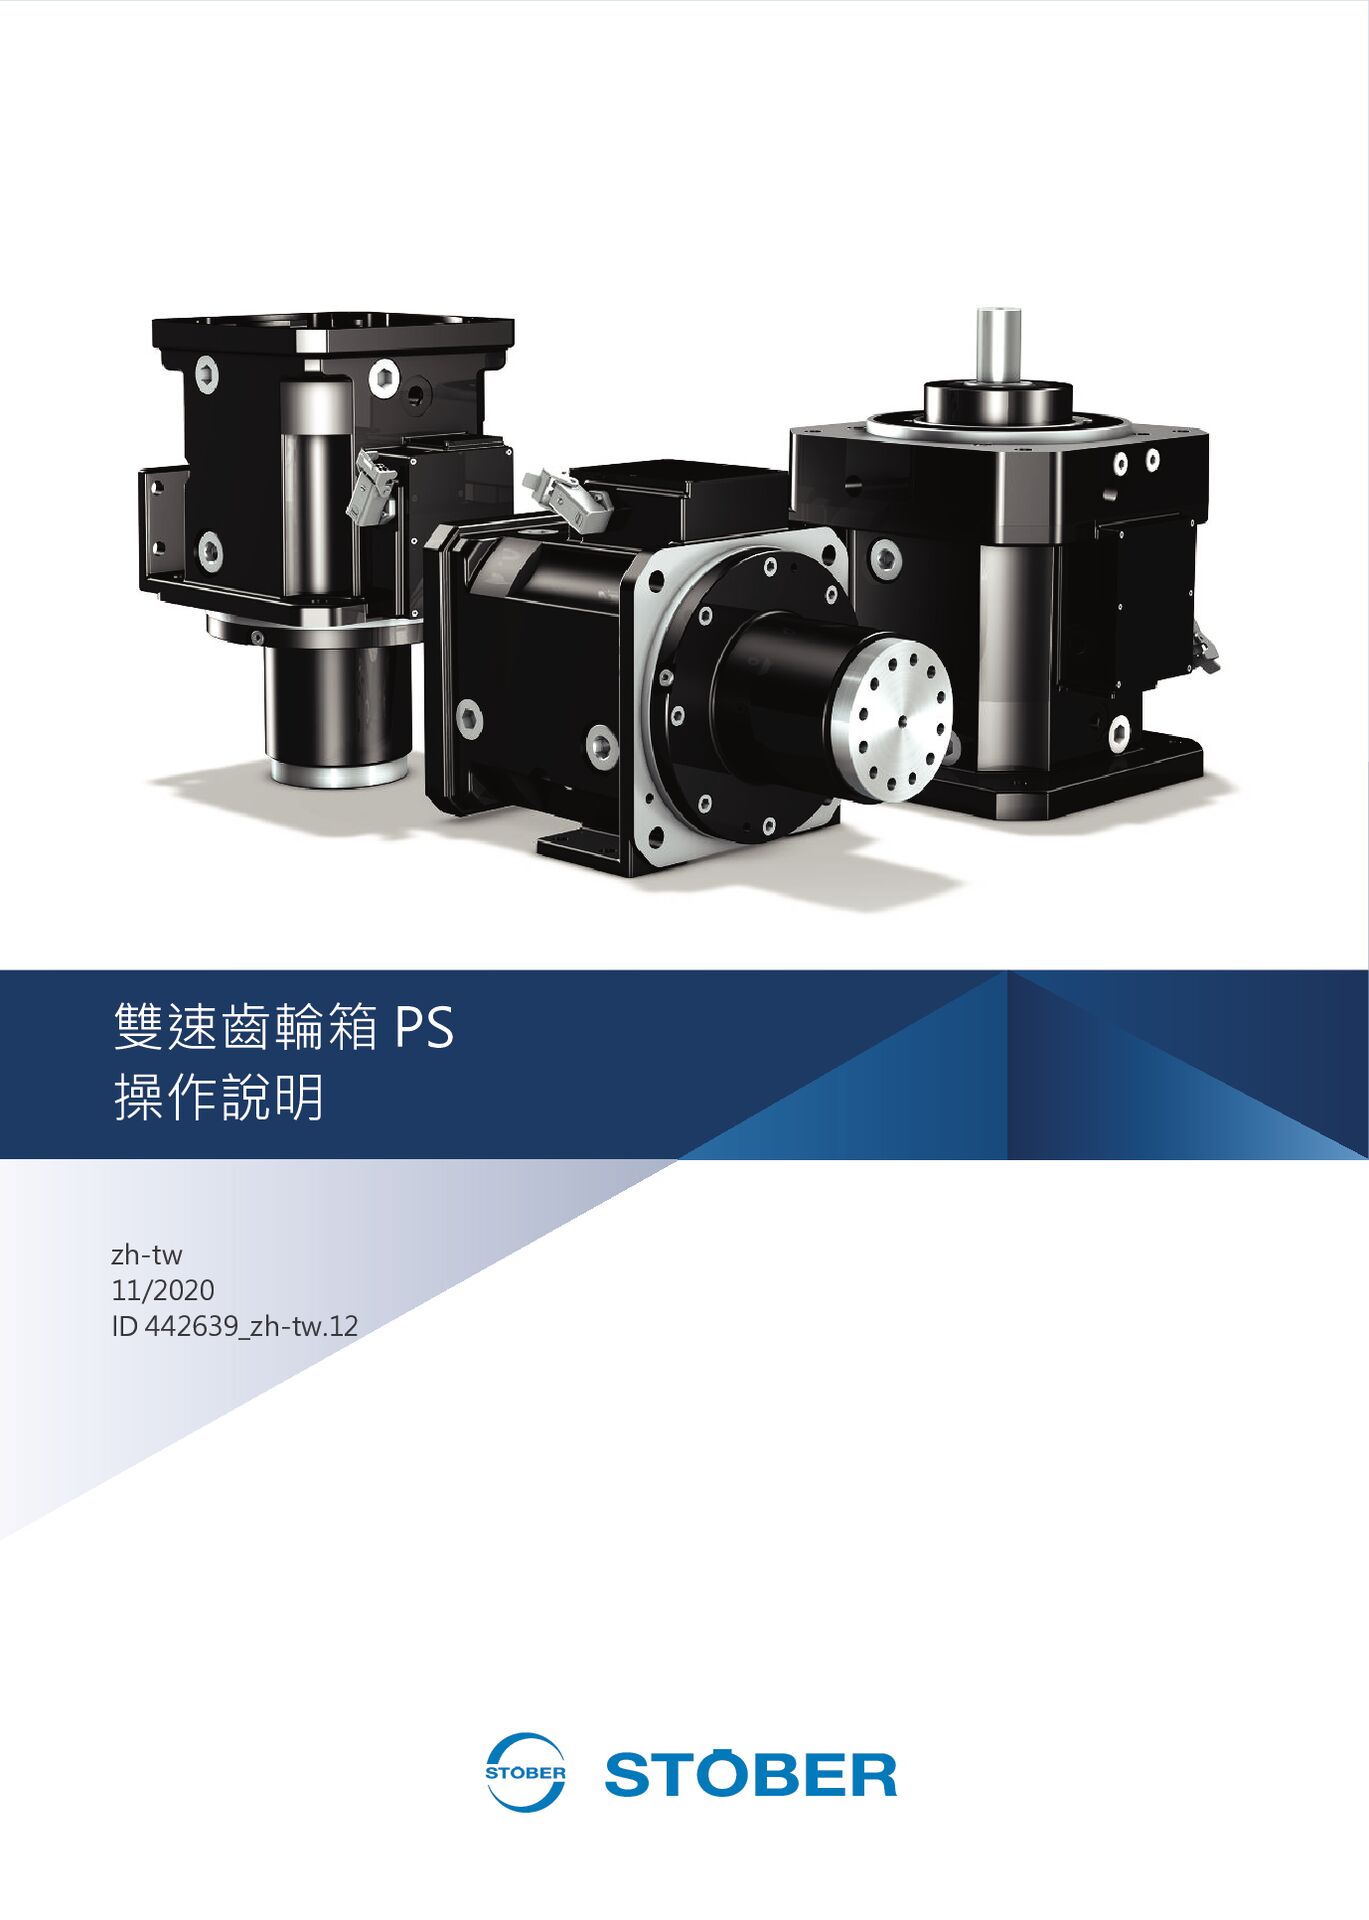 Operating manual PS tow-speed gearboxes